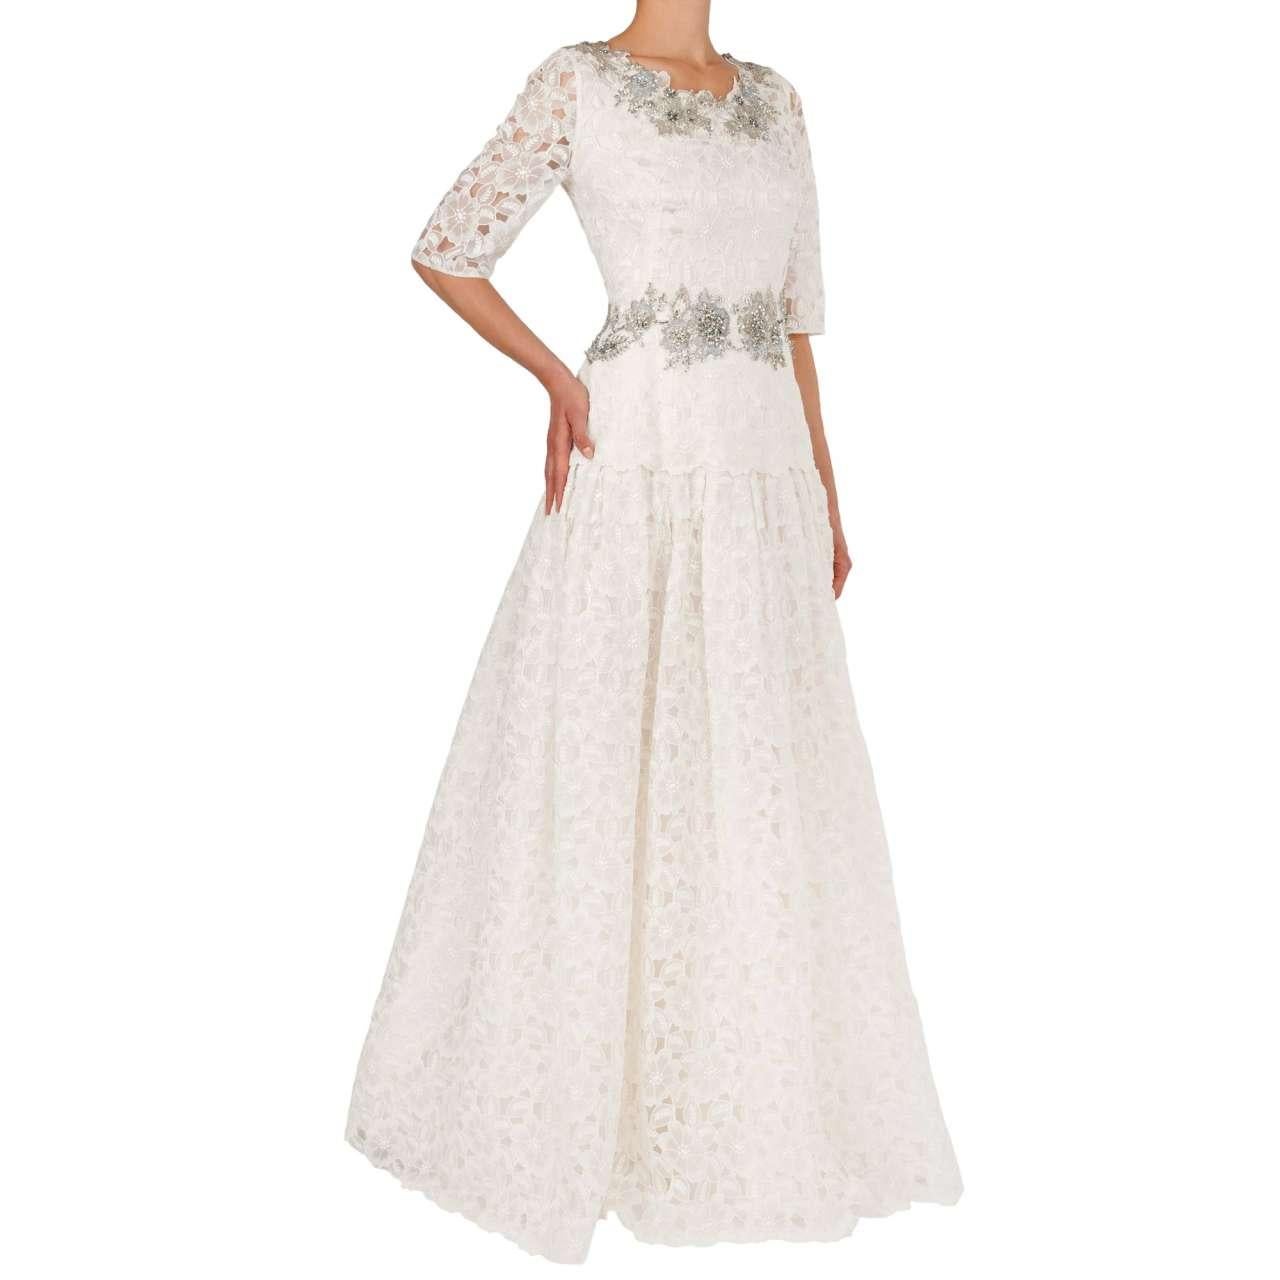 Women's Dolce & Gabbana Crystal Embroidery Floral Lace Maxi Wedding Dress White 46 M L